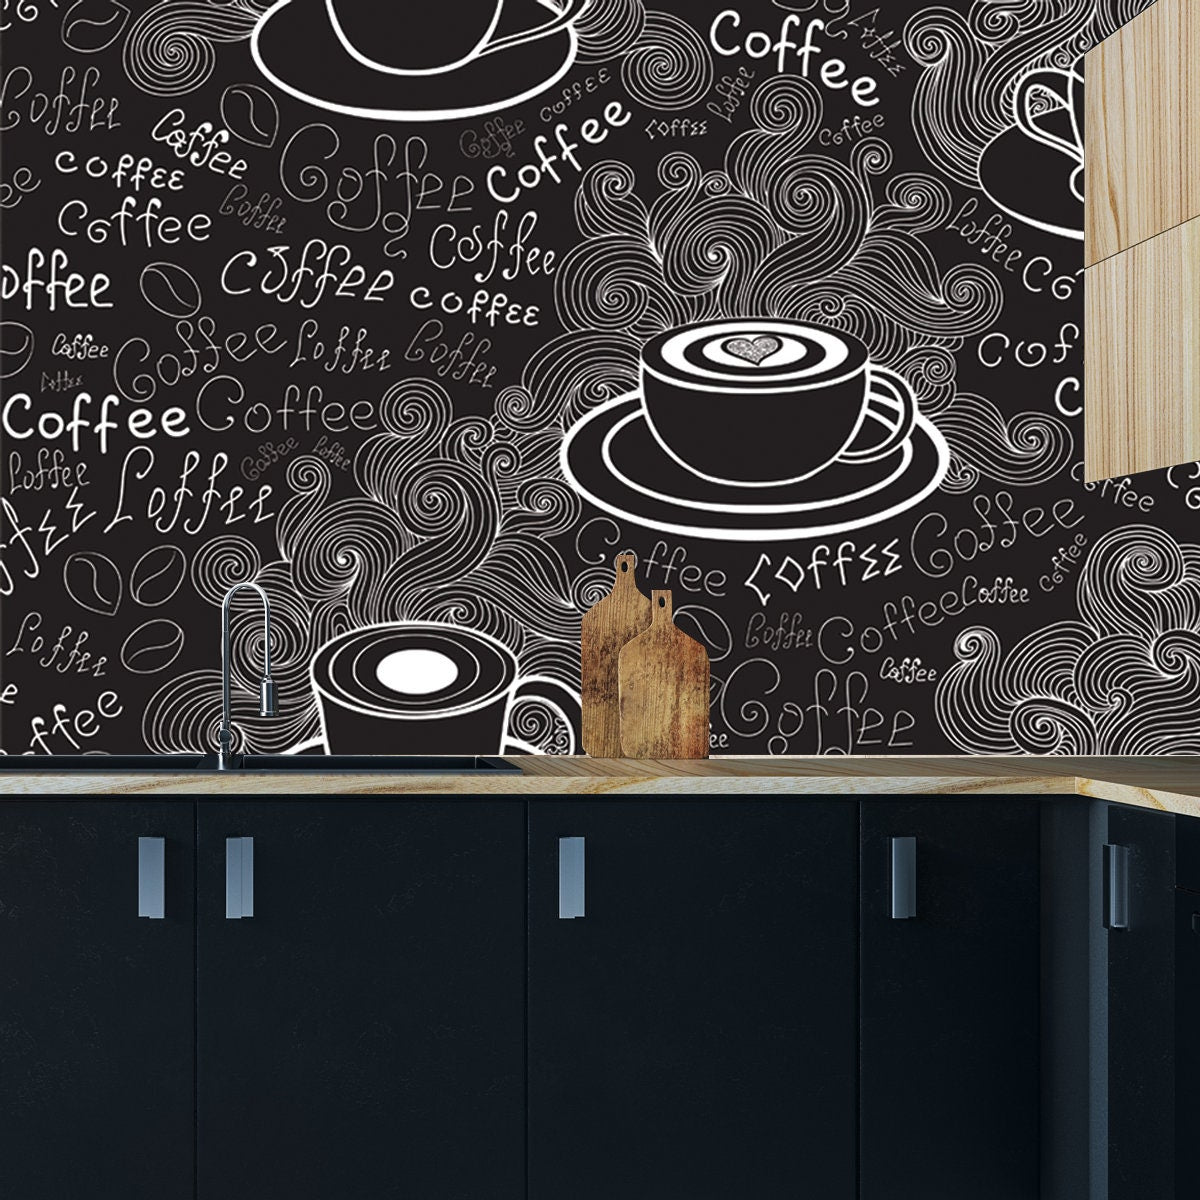 Various Coffee Cups and Words "Coffee" Handwritten by Chalk on Black Board Wallpaper Kitchen Mural